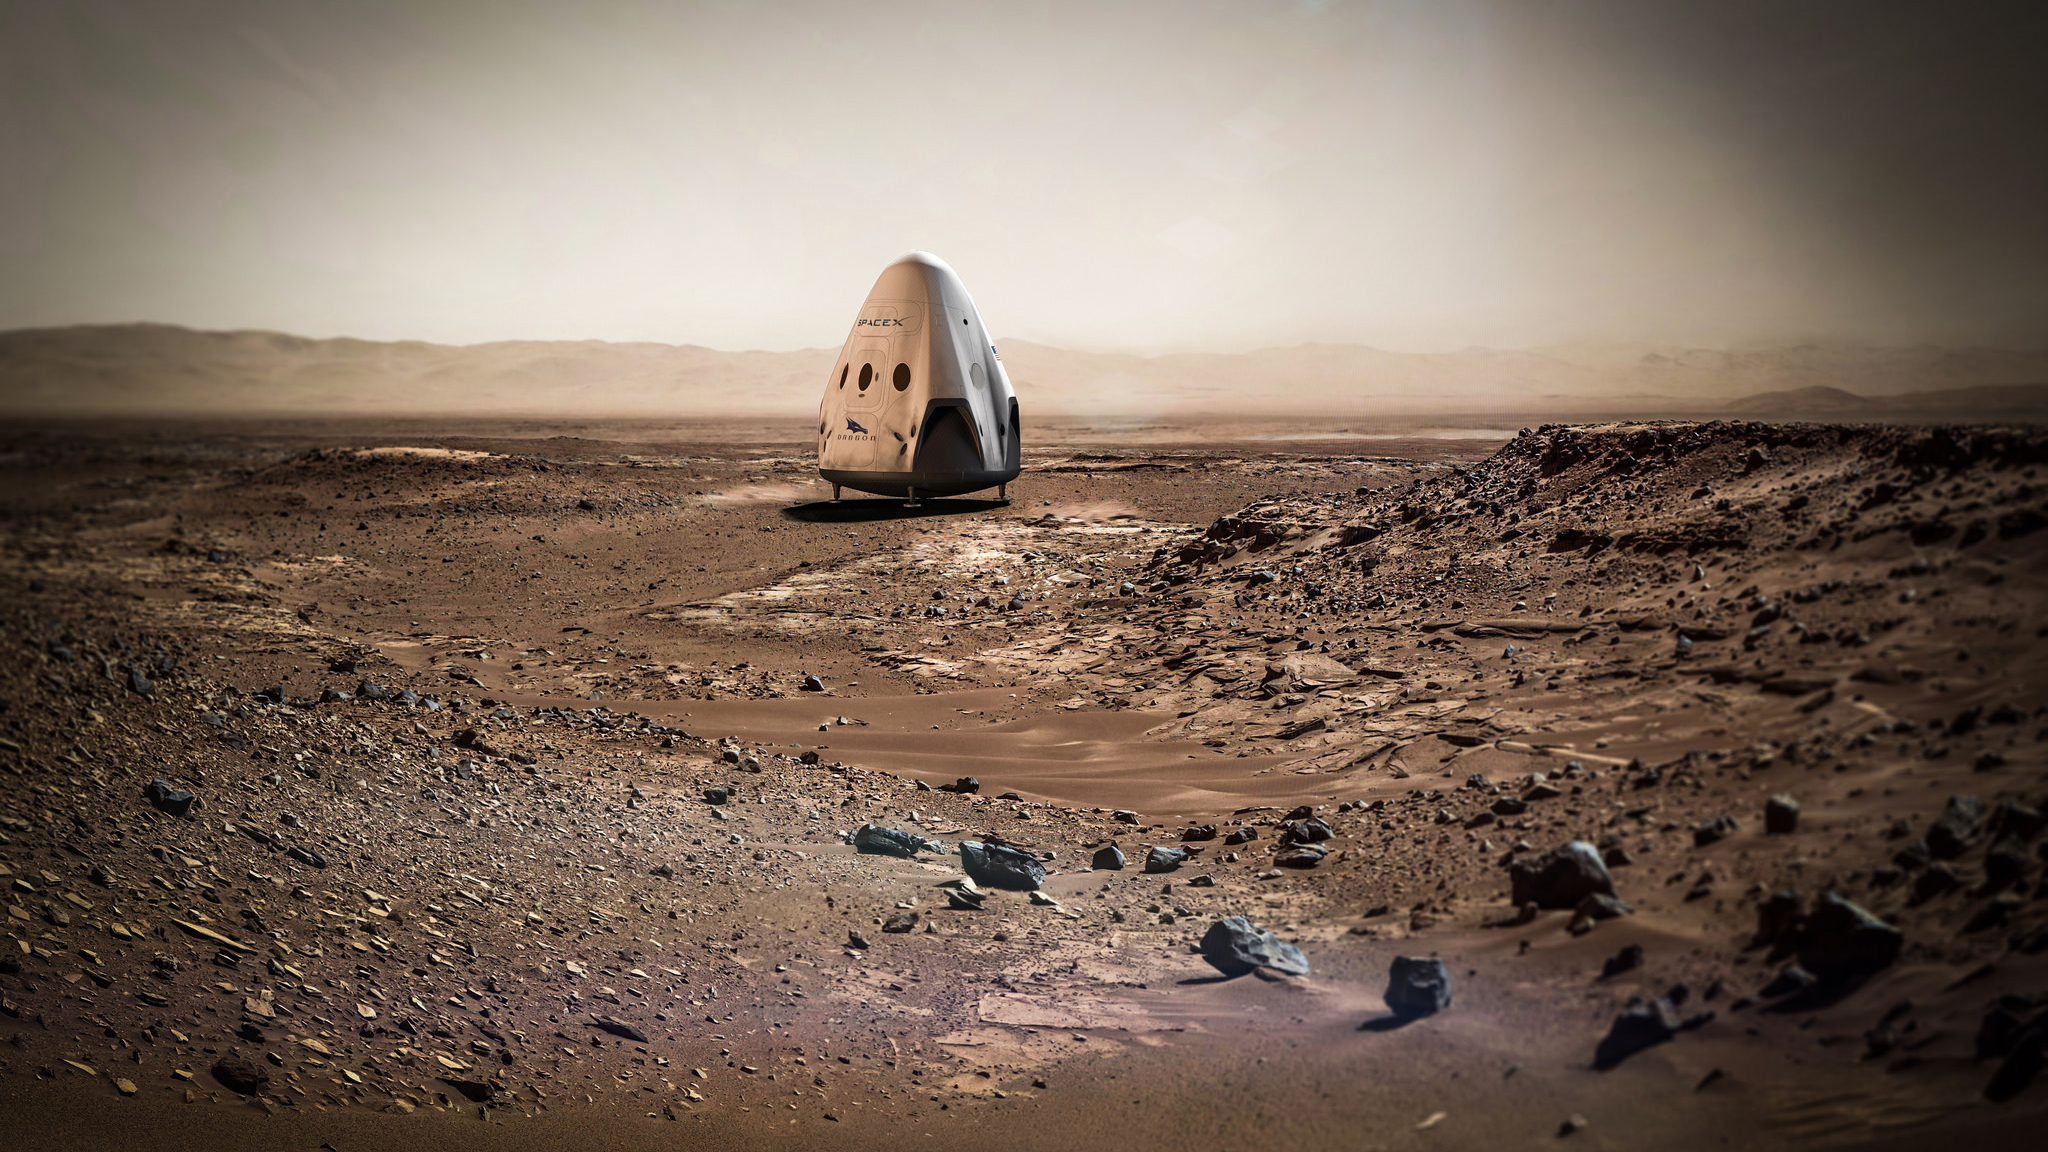 How Crazy Is Elon Musk’s Mission To Mars?